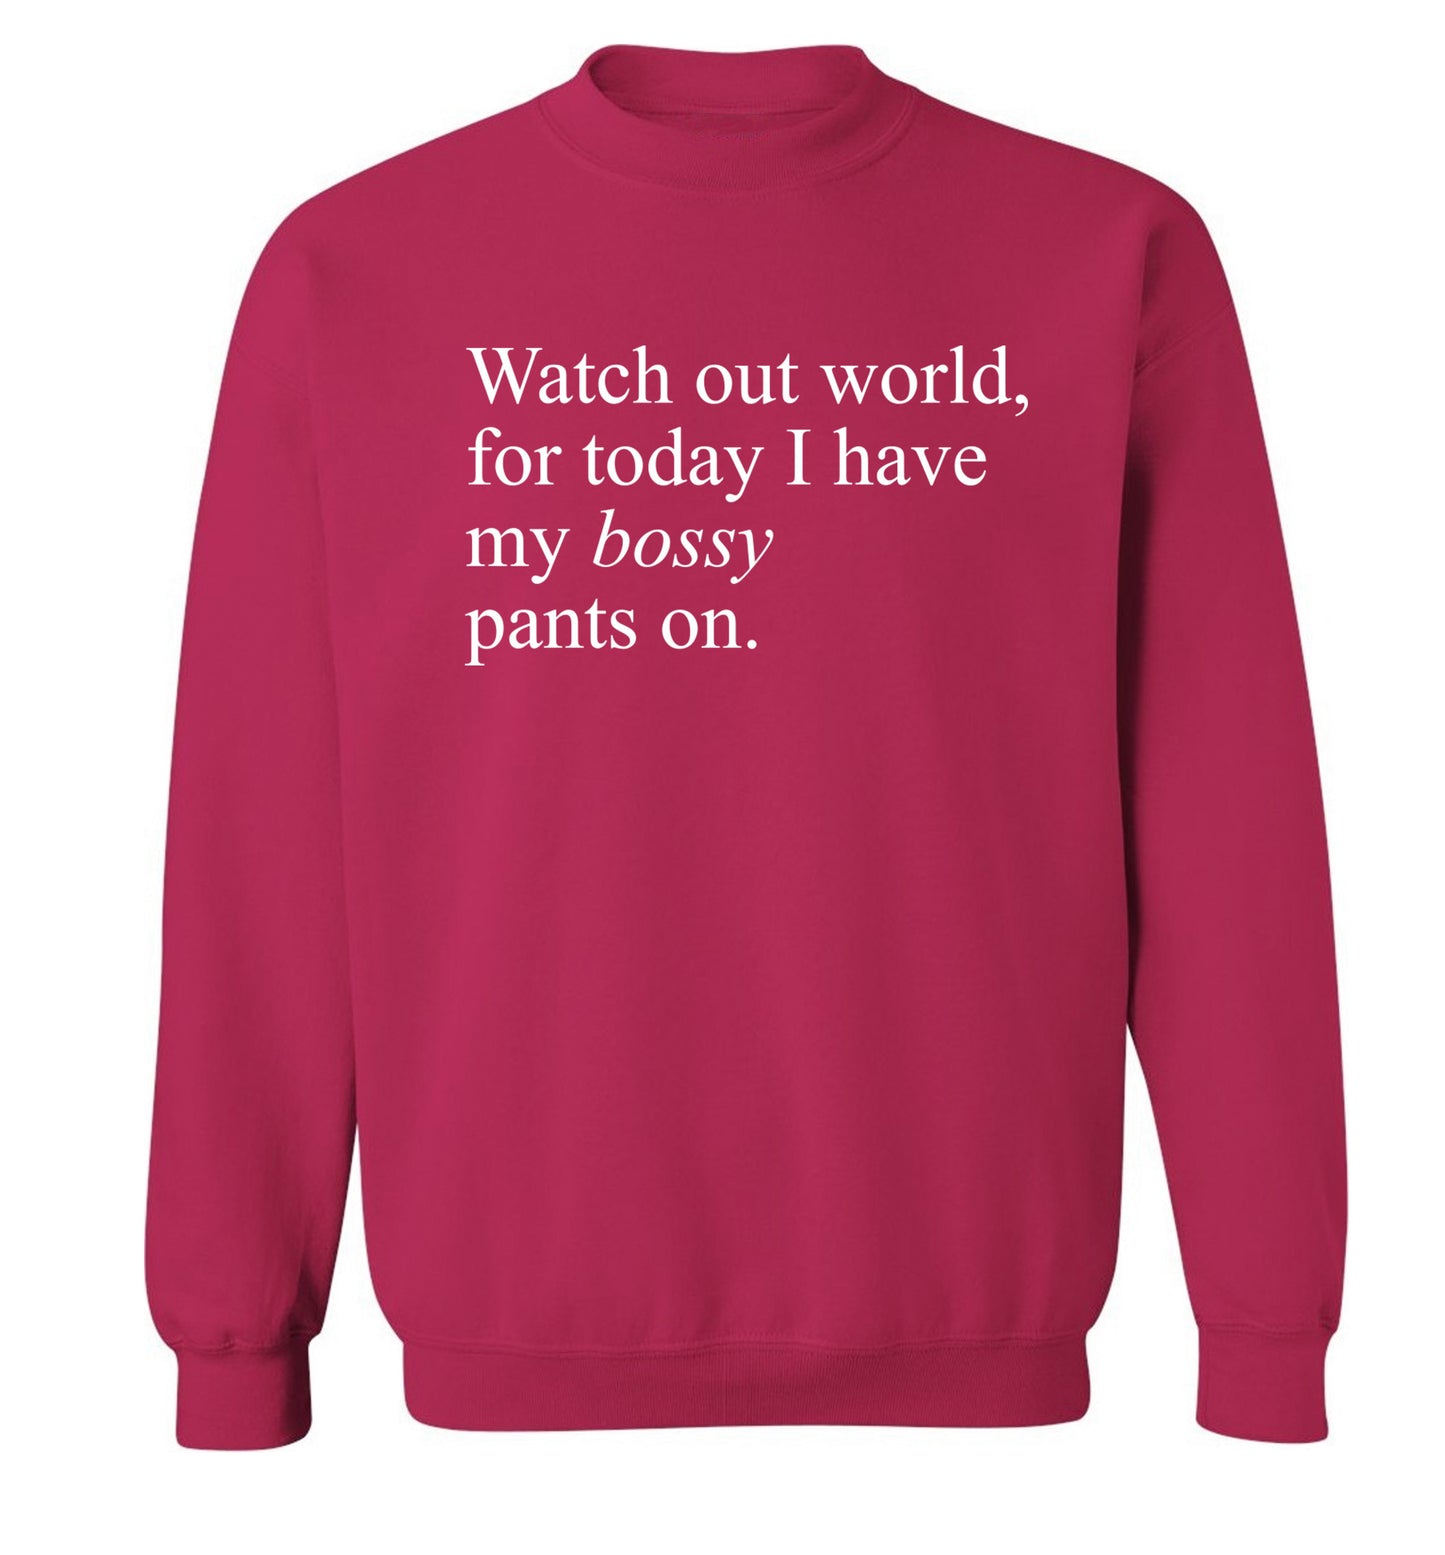 Watch out world, for today I have my bossy pants on Adult's unisex pink Sweater 2XL